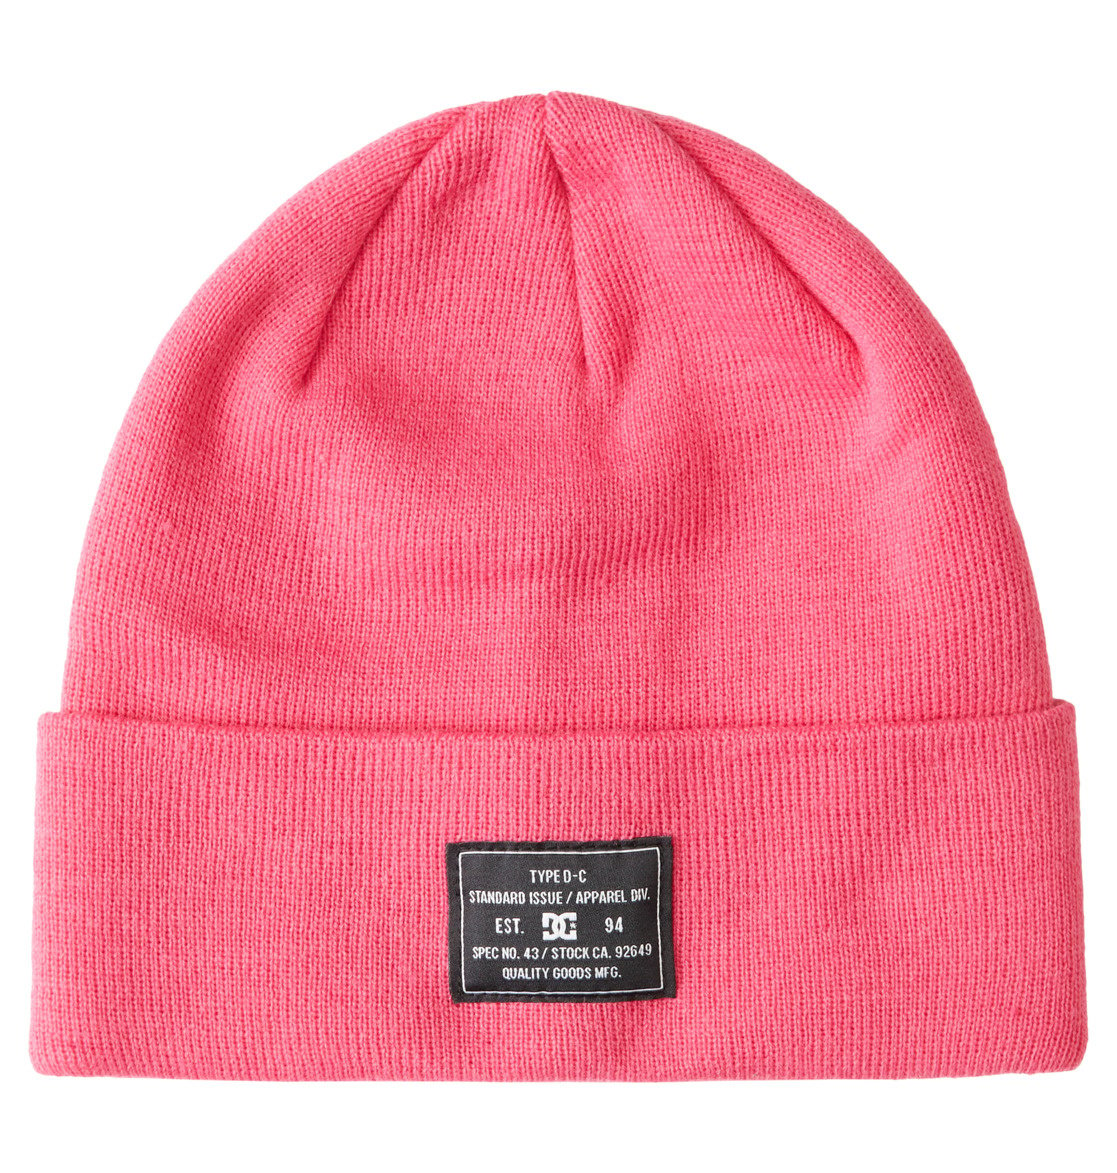 Women's Label Beanie-CRAZY PINK - Medicine Hat-The Boarding House